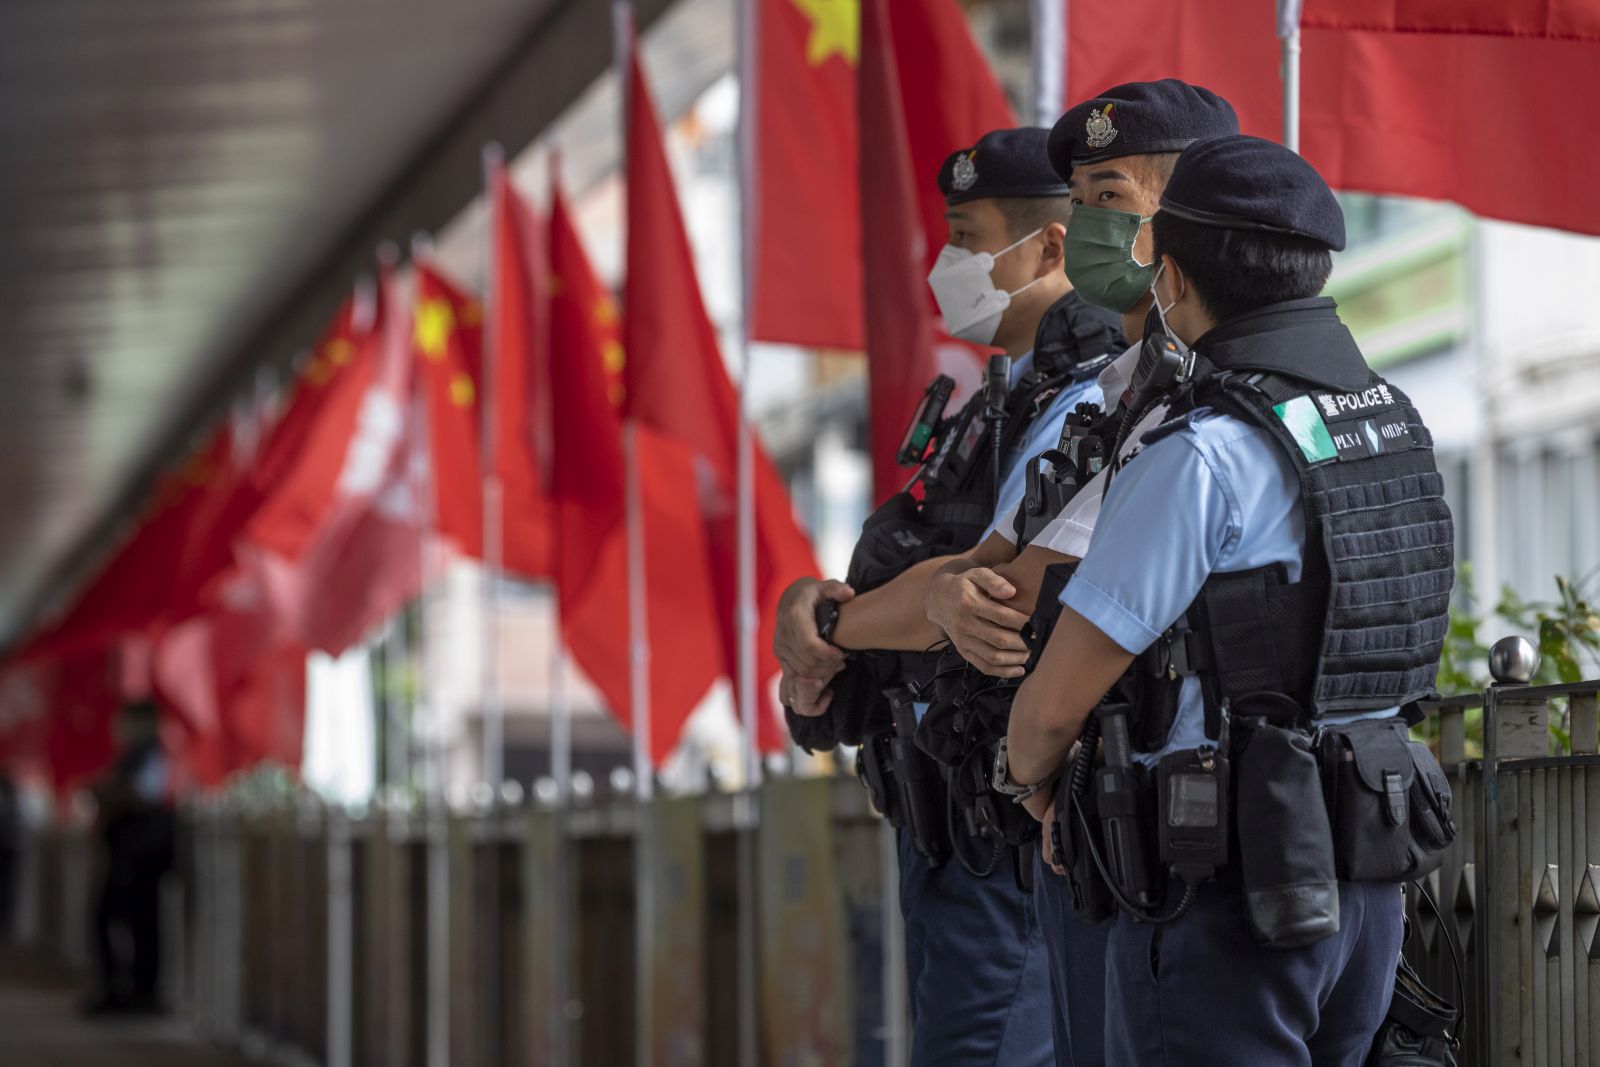 epa10216781 Police officers stand guard during China's National Day in Hong Kong, China, 01 October 2022. China celebrates its National Day on 01 October 2022, marking the 73rd founding anniversary of the People's Republic of China.  EPA/MIGUEL CANDELA